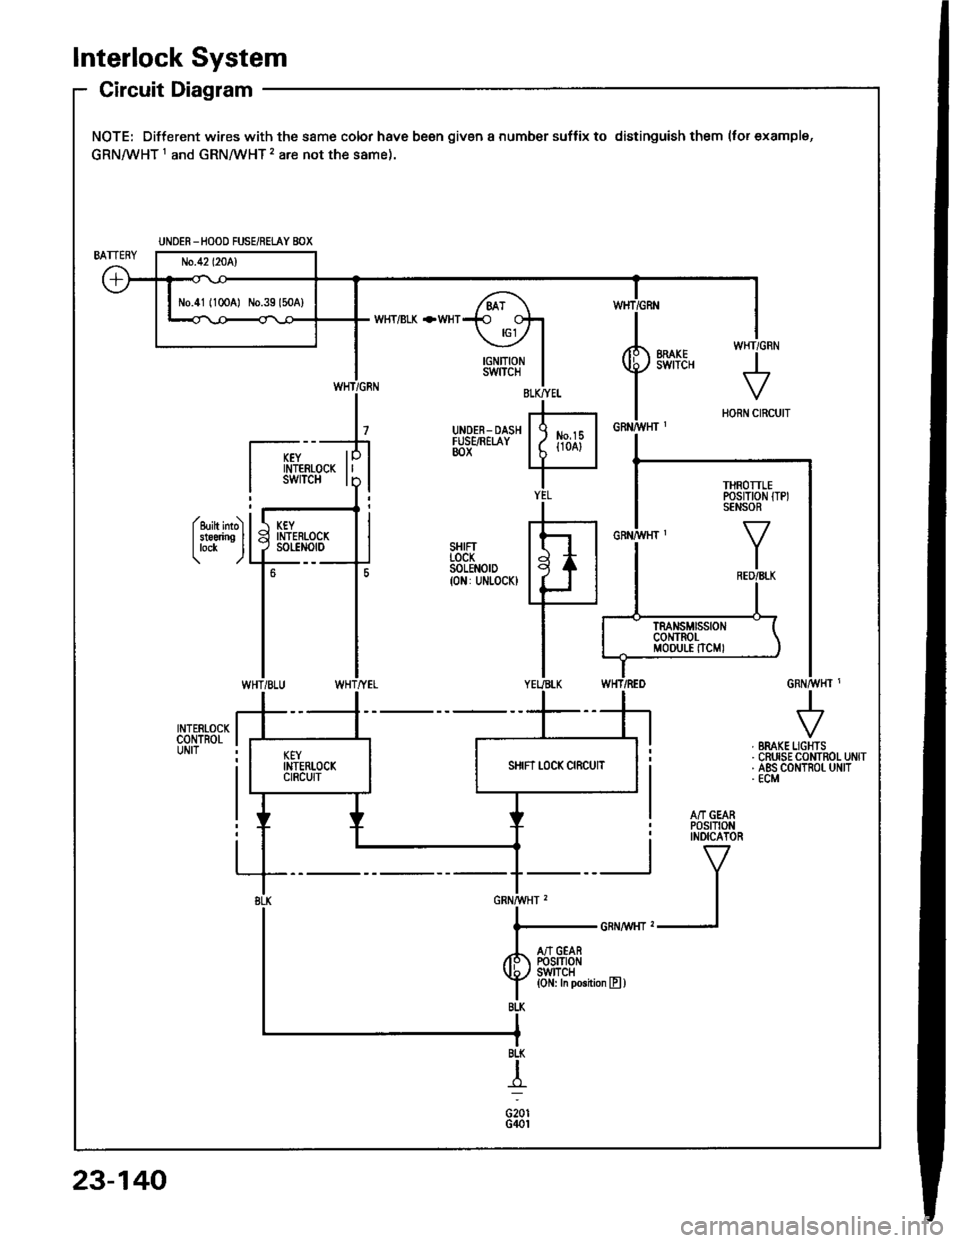 HONDA INTEGRA 1994 4.G User Guide lnterlock System
Circuit Diagram
NOTE: Different wires with the same color have been given a number suffix to distinguish them (tor examplg,
GRNMHT 1 and GRNMHT 2 are not the same).
W}IT/BLK +WHT
Y I 